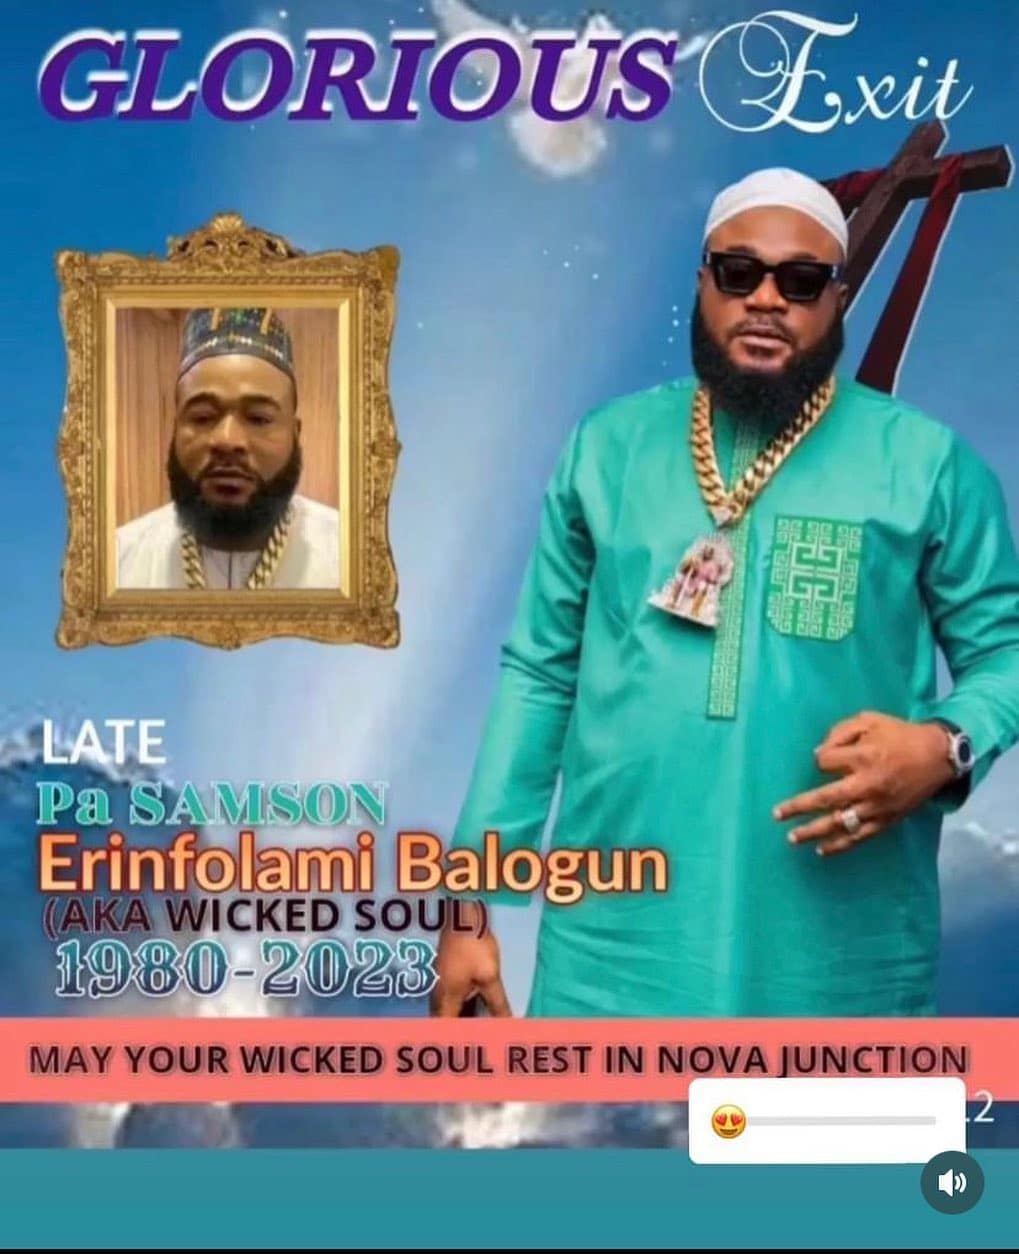 Angry Nigerians trend 'fake' obituary poster of Sam Larry after Mohbad's body was exhumed